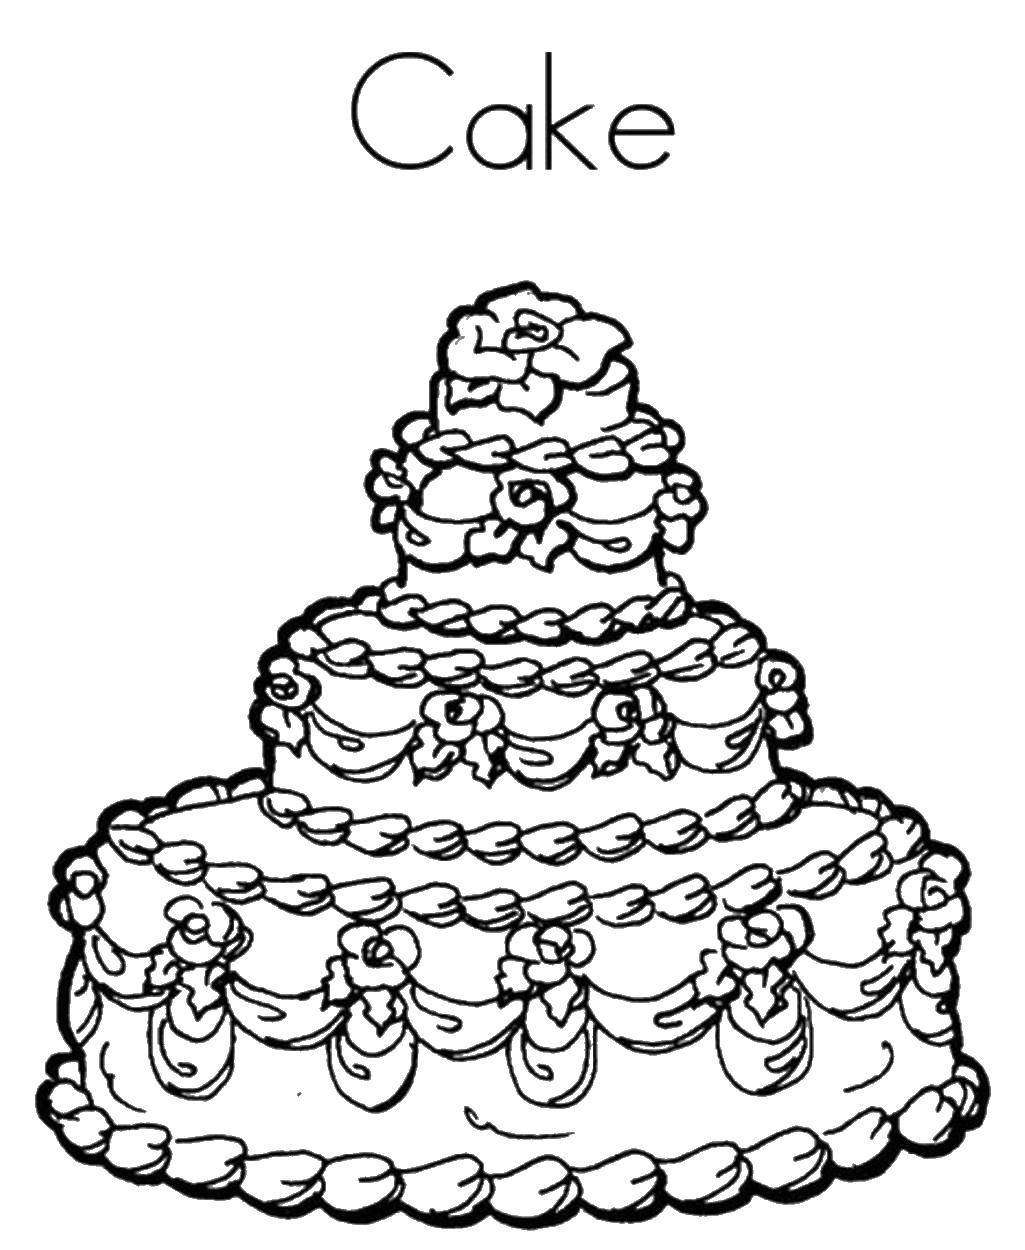 Coloring A big cake with cream. Category cakes. Tags:  cake, flowers, cream.